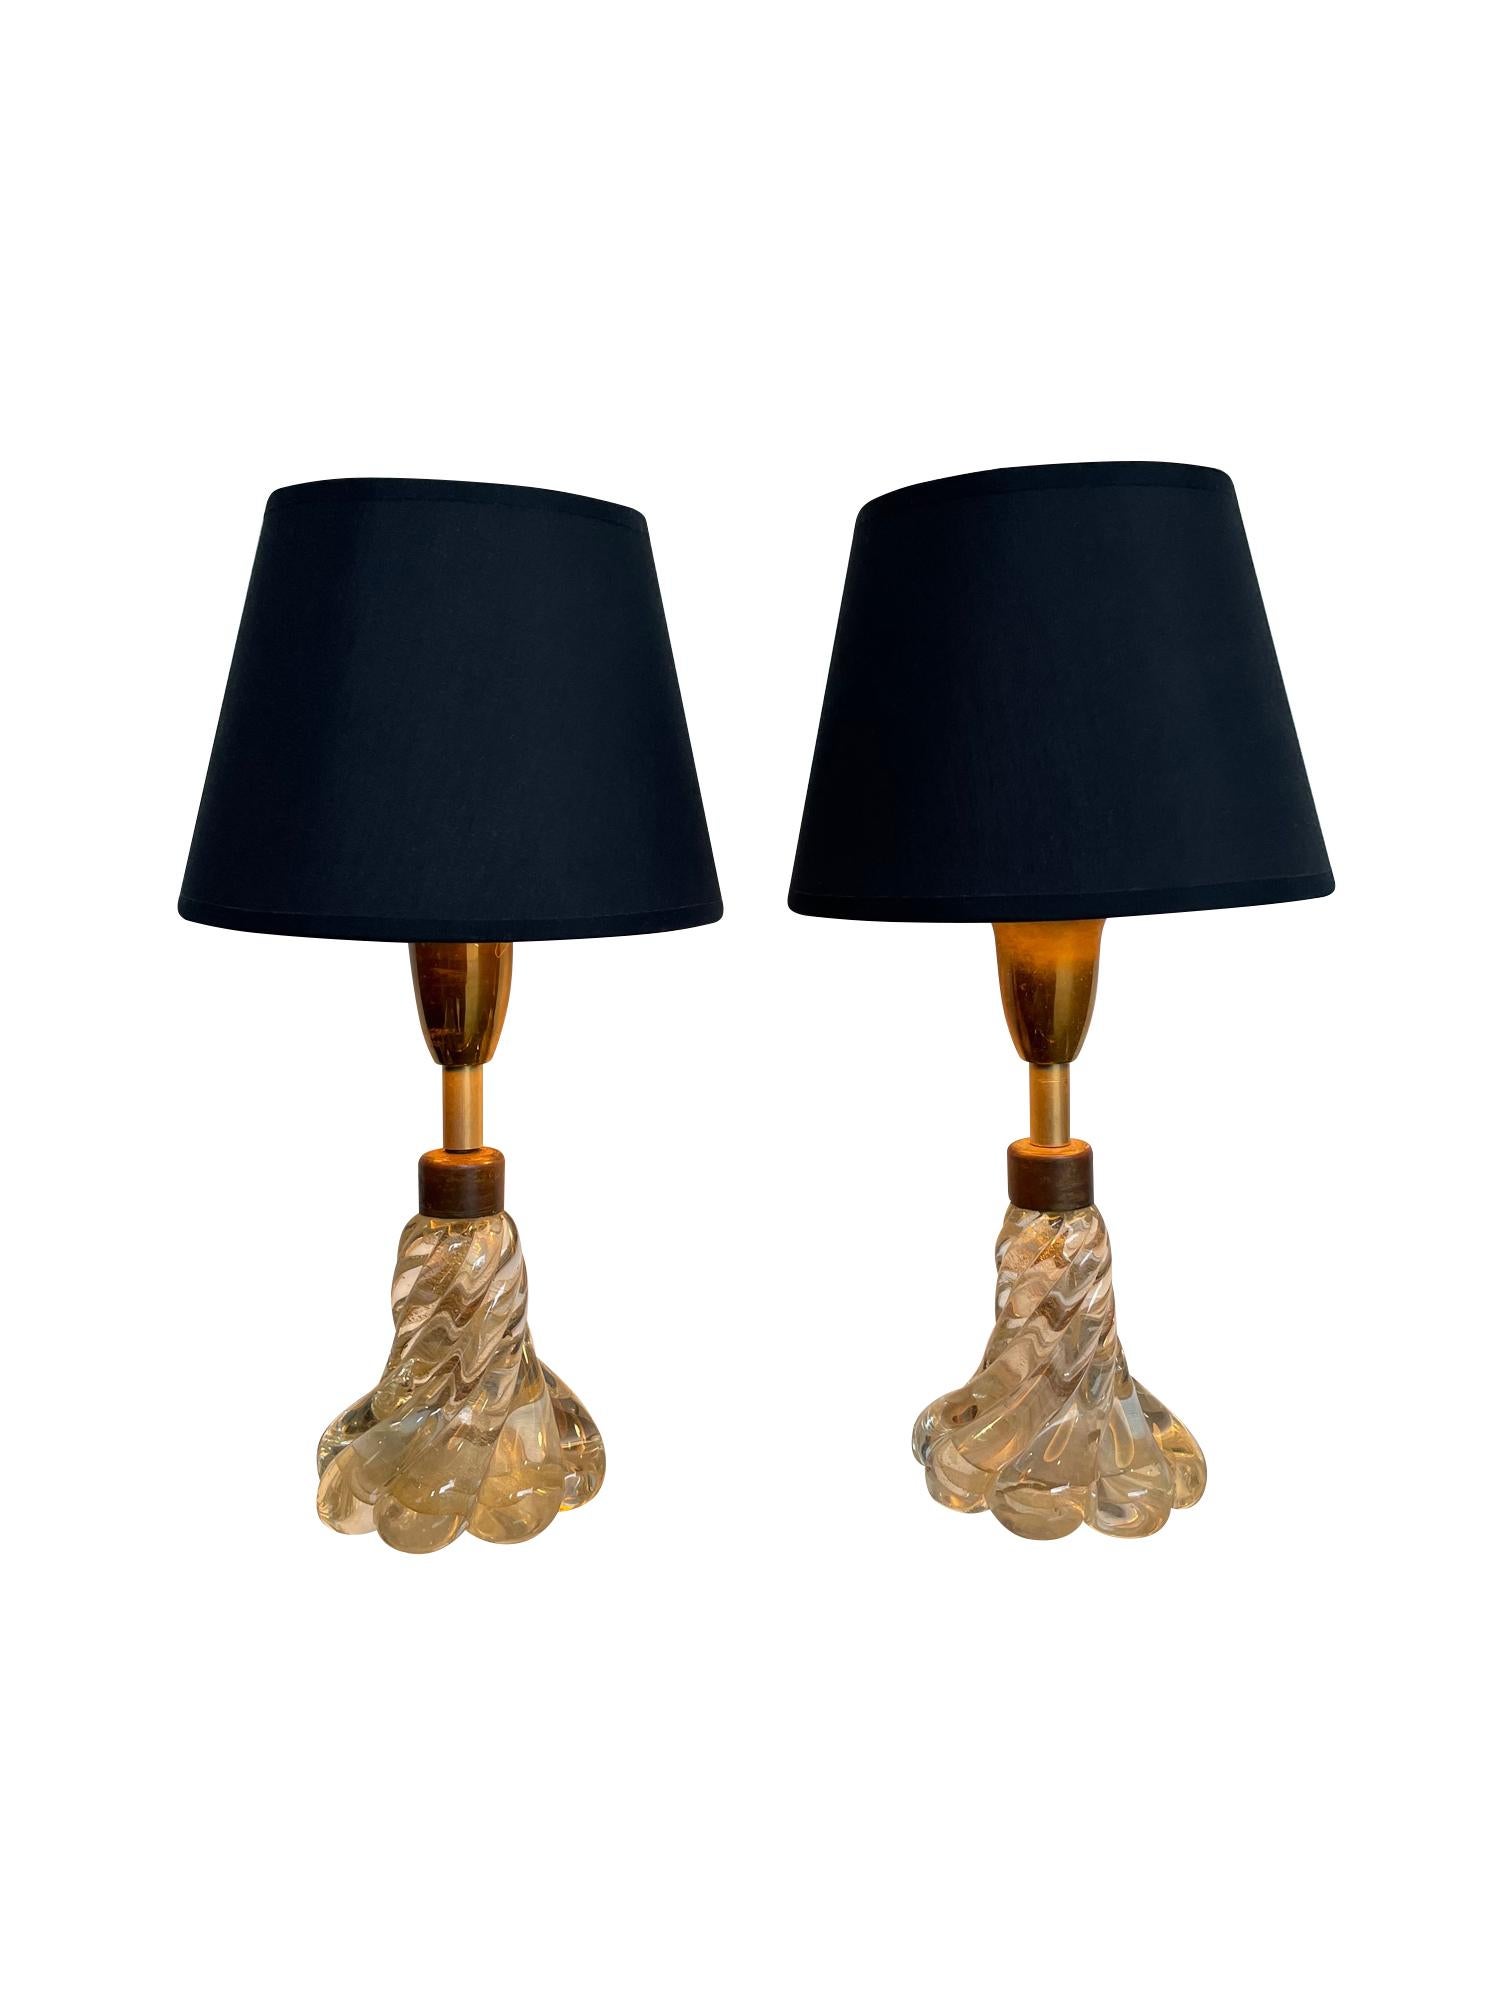 A pretty pair of 1950s Barovier & Toso lamps with Avventurina Murano twisted glass base with gold flecks in. Mounted with scolloped brass top and fitting, re-wired with antique gold cord flex and PAT tested with new bespoke black shades with gold